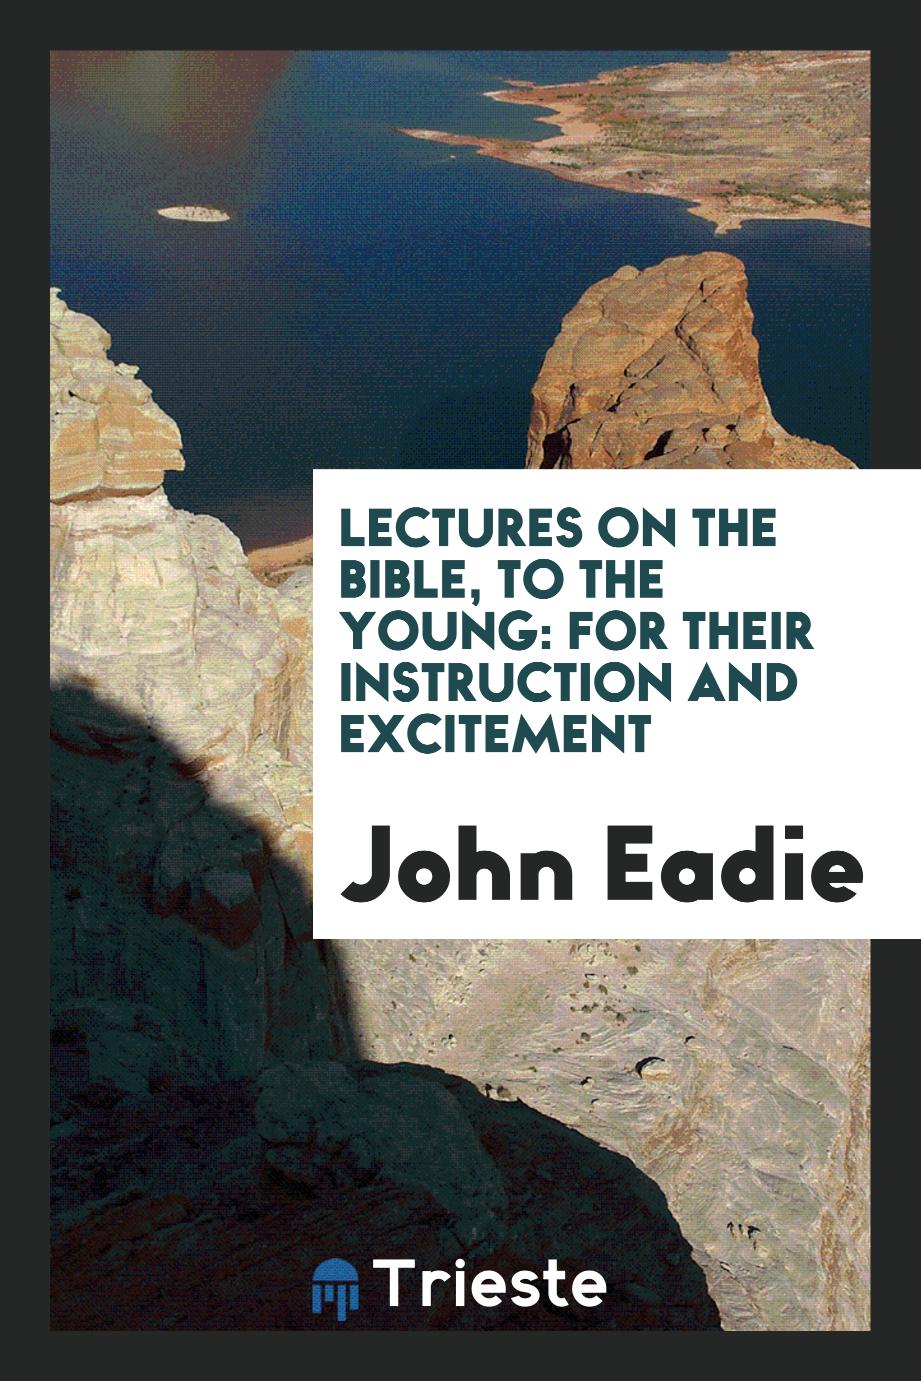 Lectures on the Bible, to the Young: For Their Instruction and Excitement